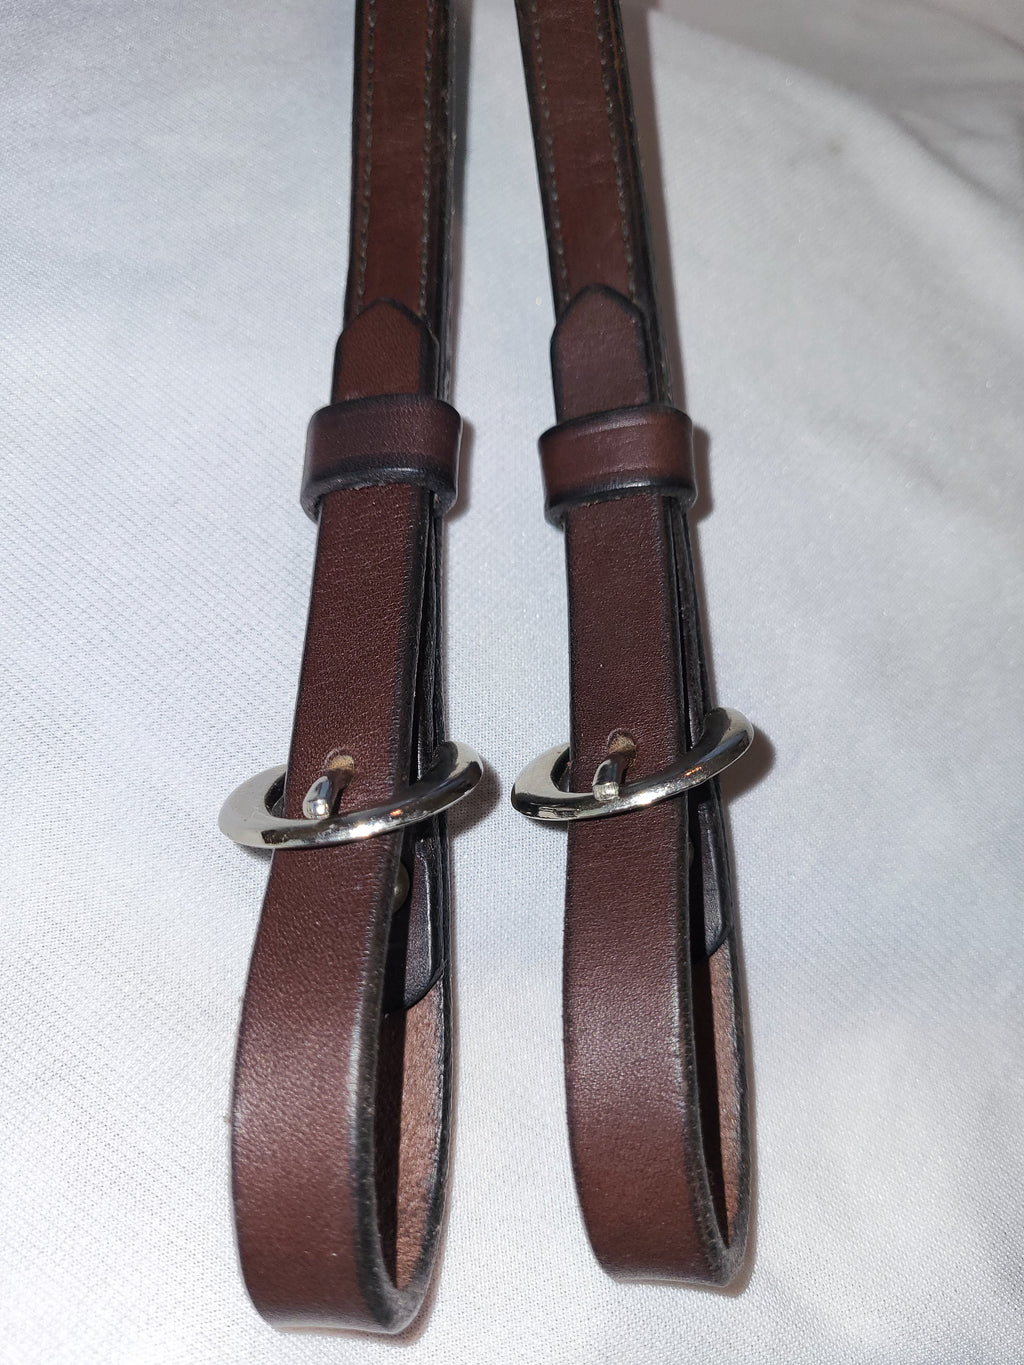 Tory Leather Split Reins with Buckle Ends